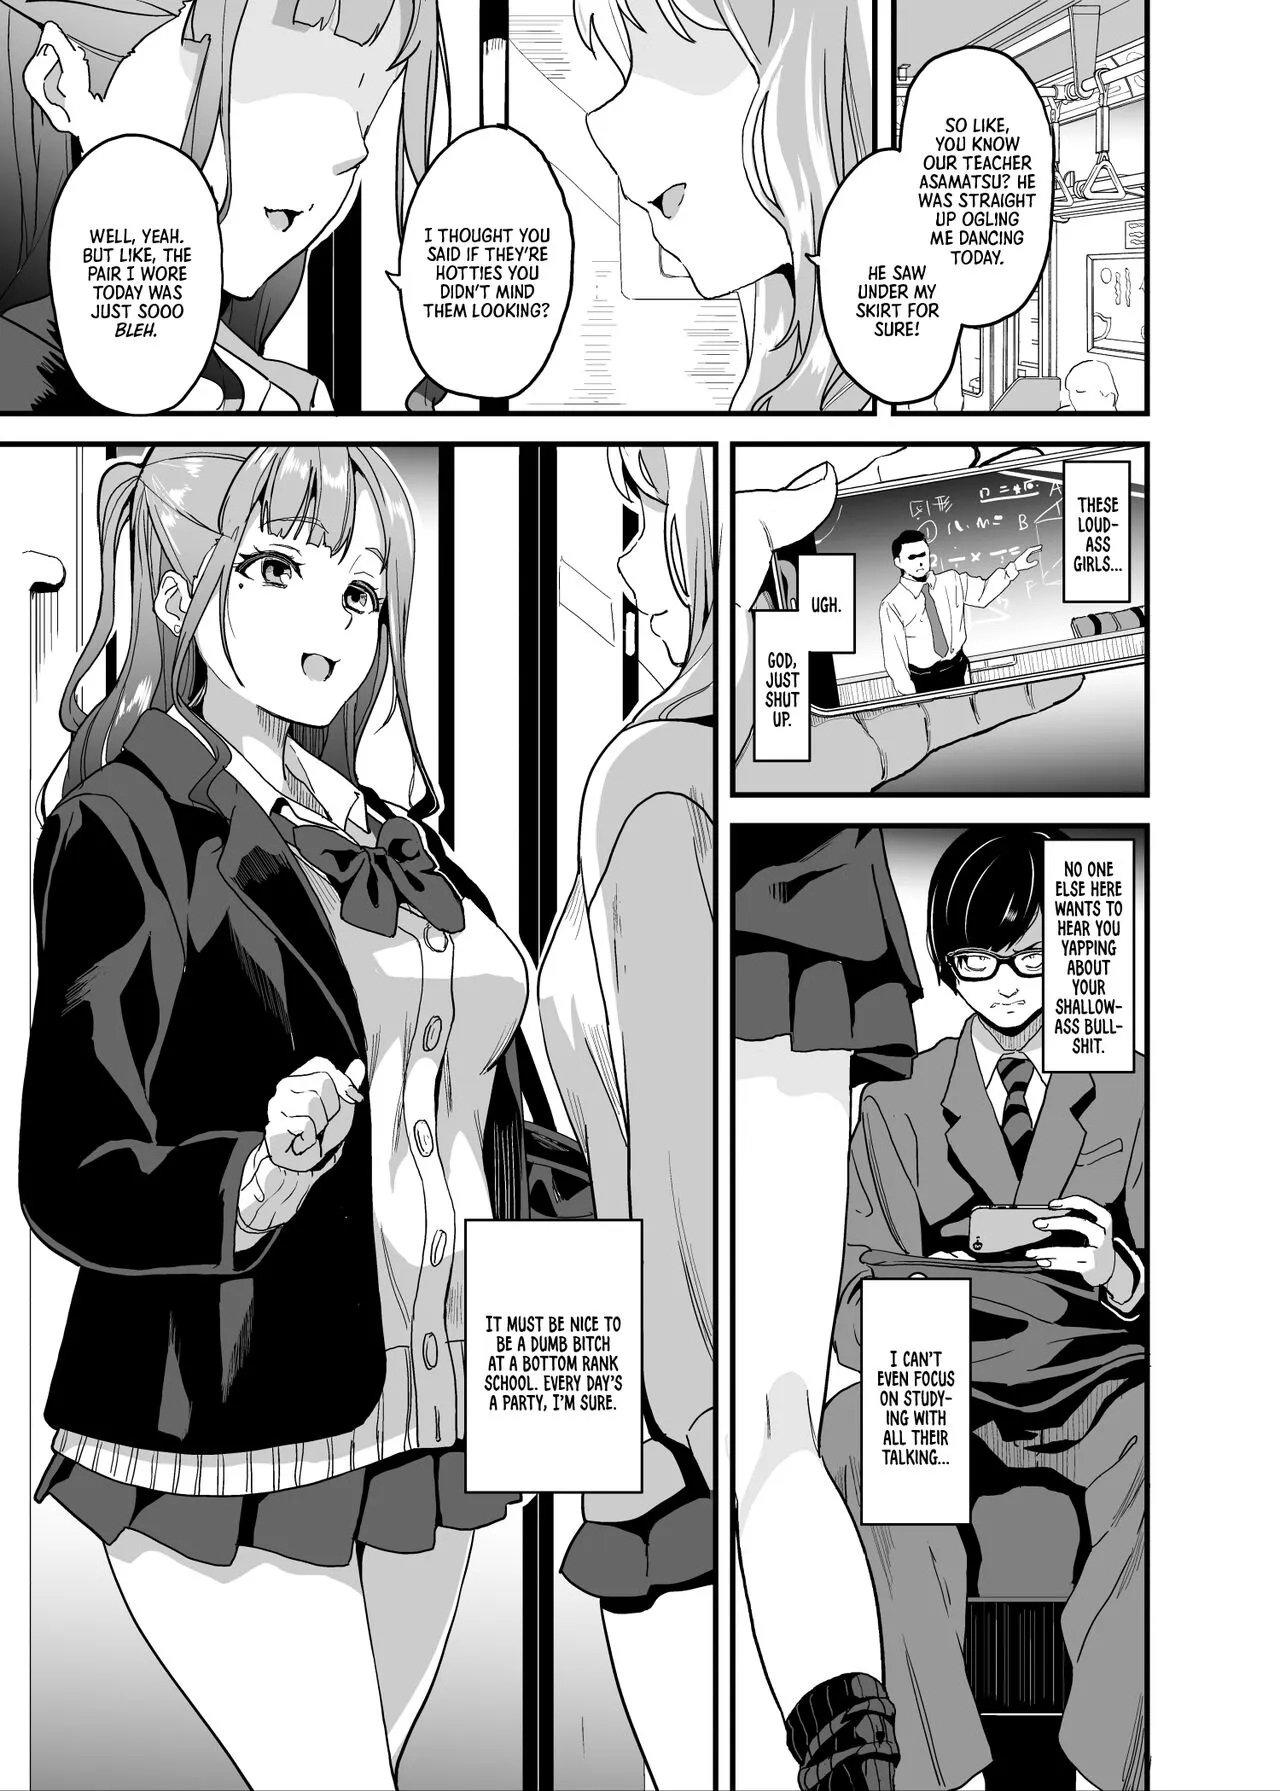 Hentai Artist Date - Date â€“ Medicine to Become Another Person 5 | Top Hentai Comics